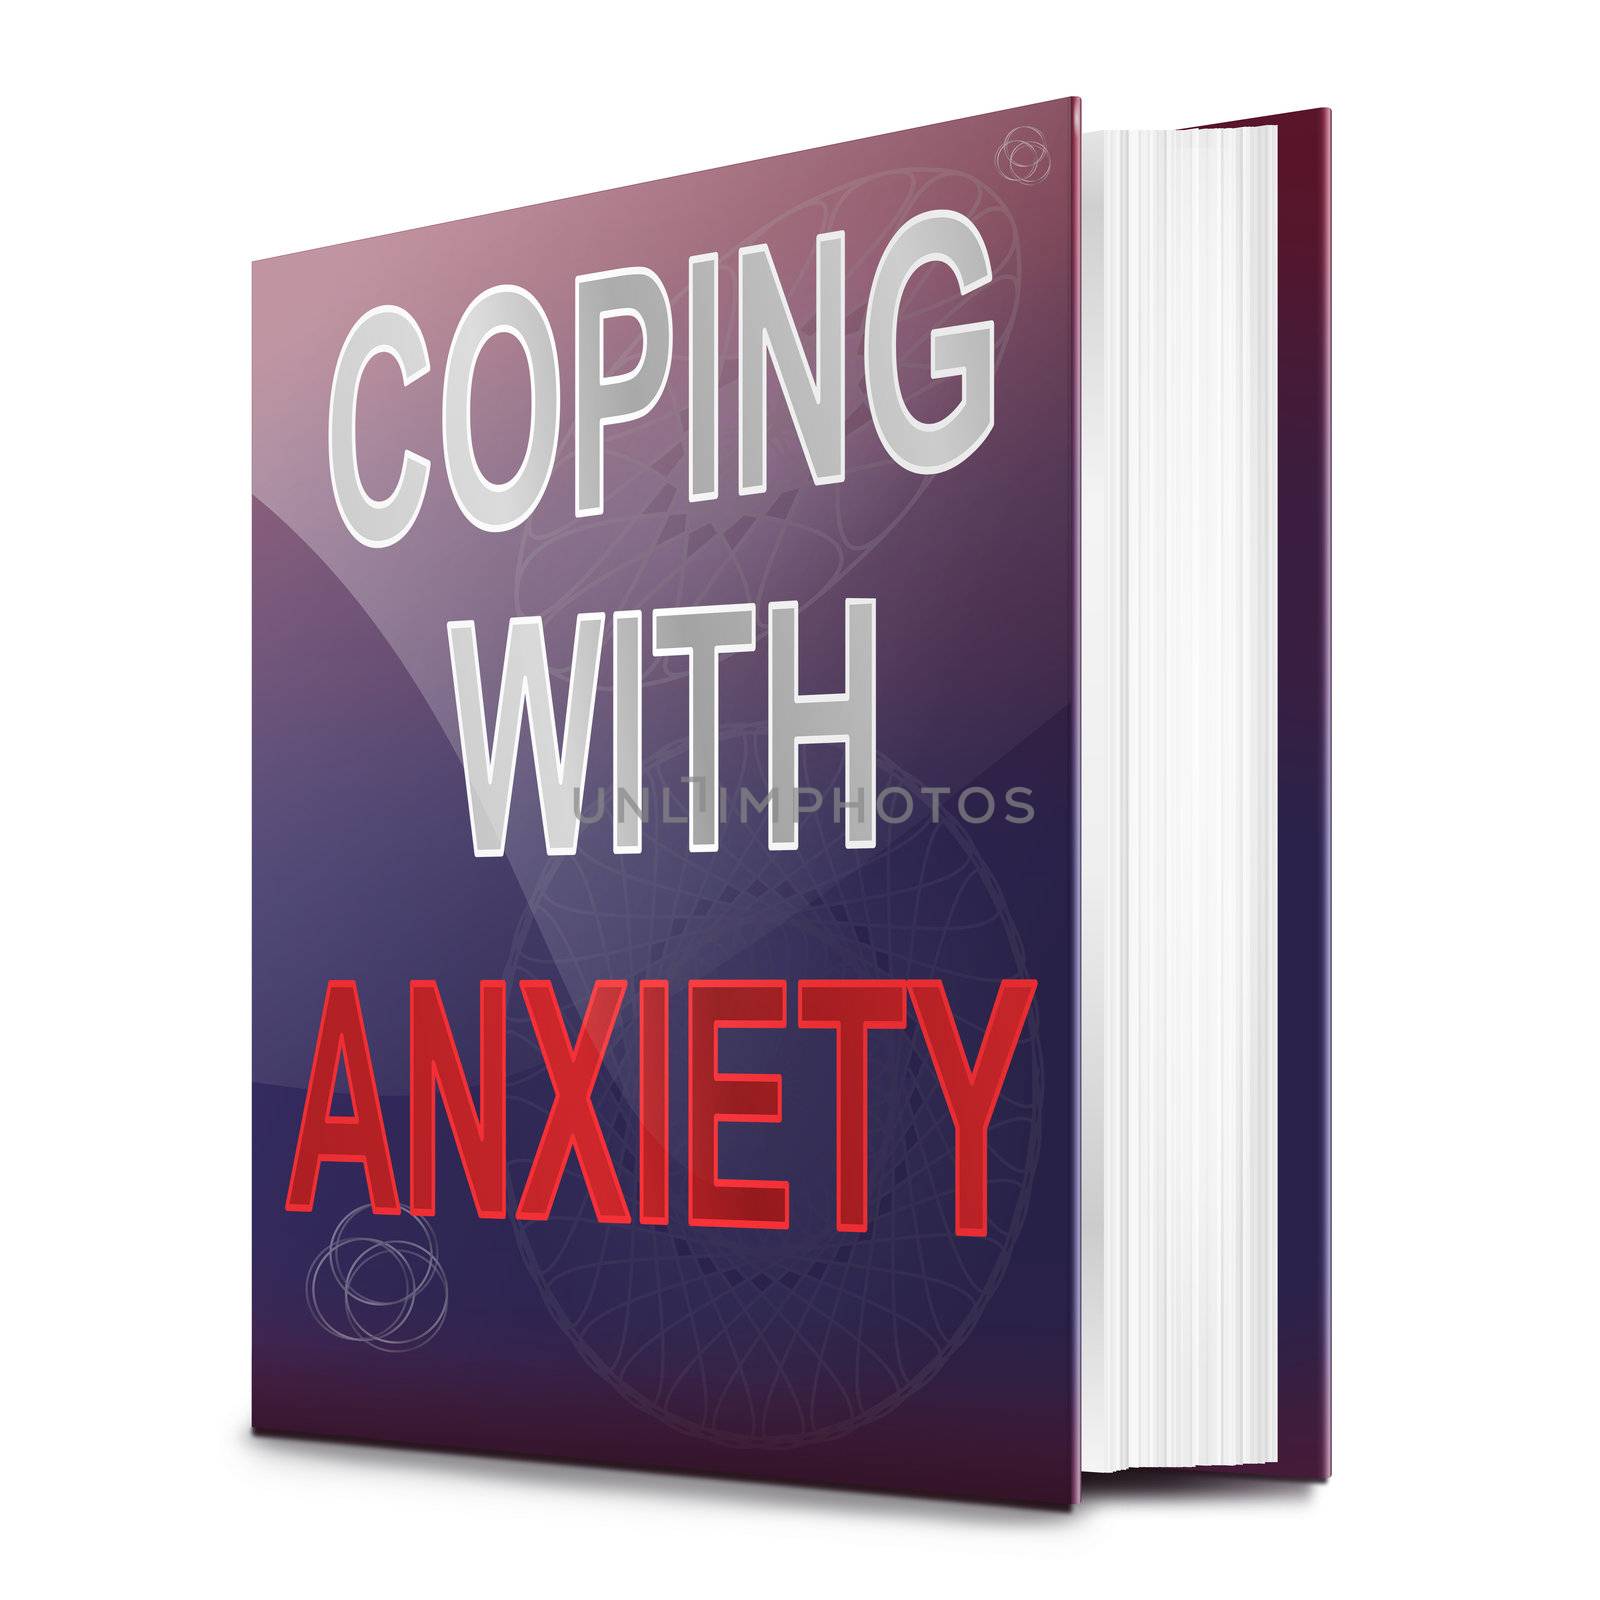 Illustration depicting a book with an anxiety concept title. White background.